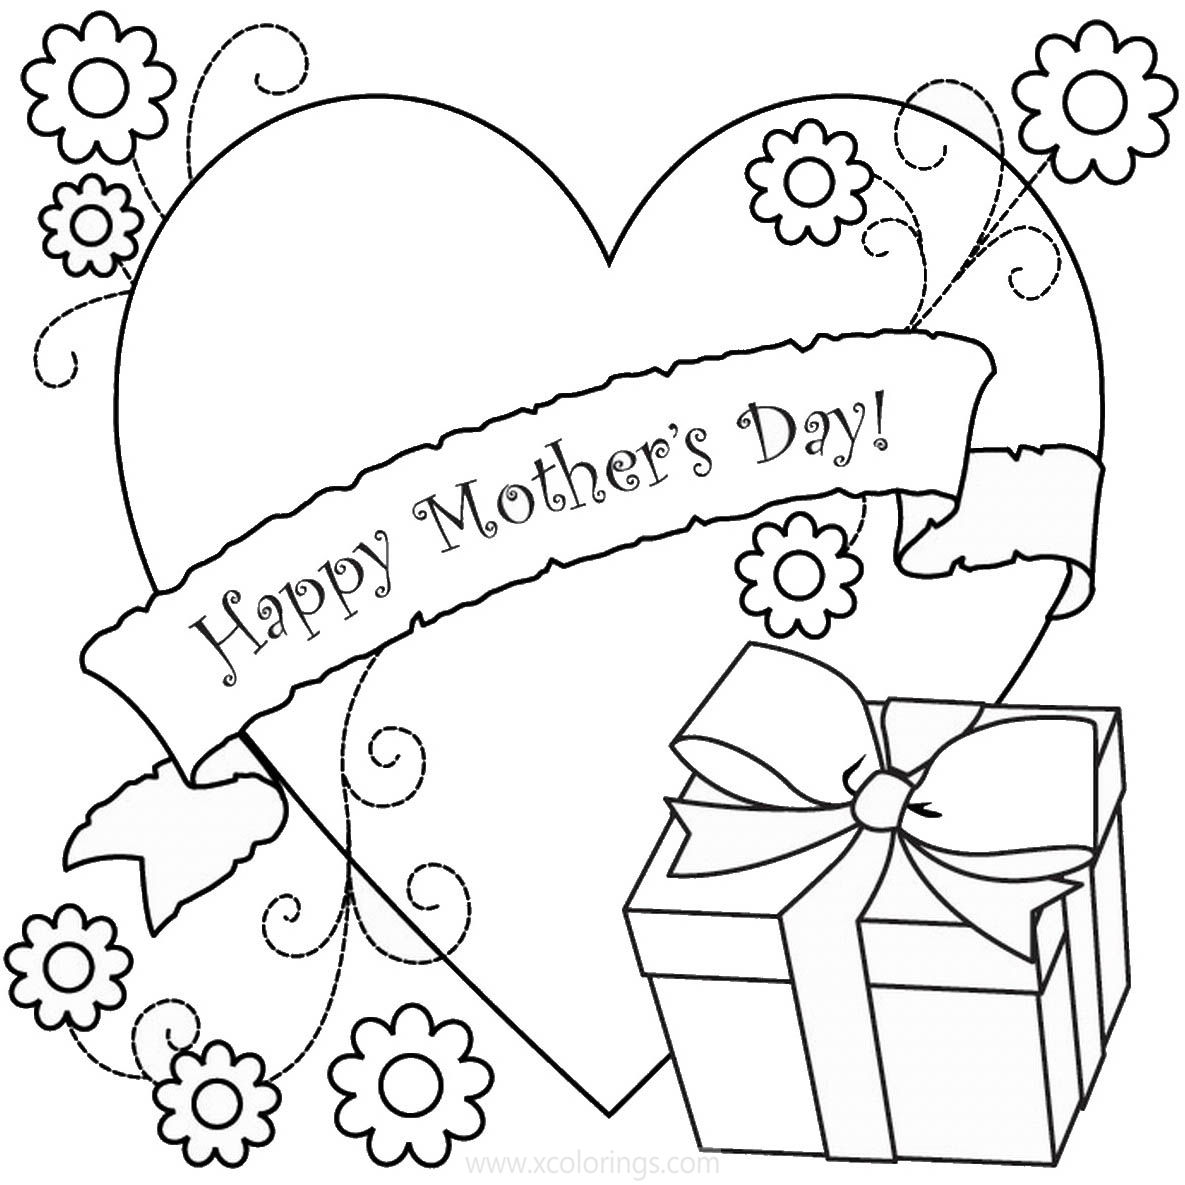 Free Happy Mother's Day Coloring Pages with Present Box printable